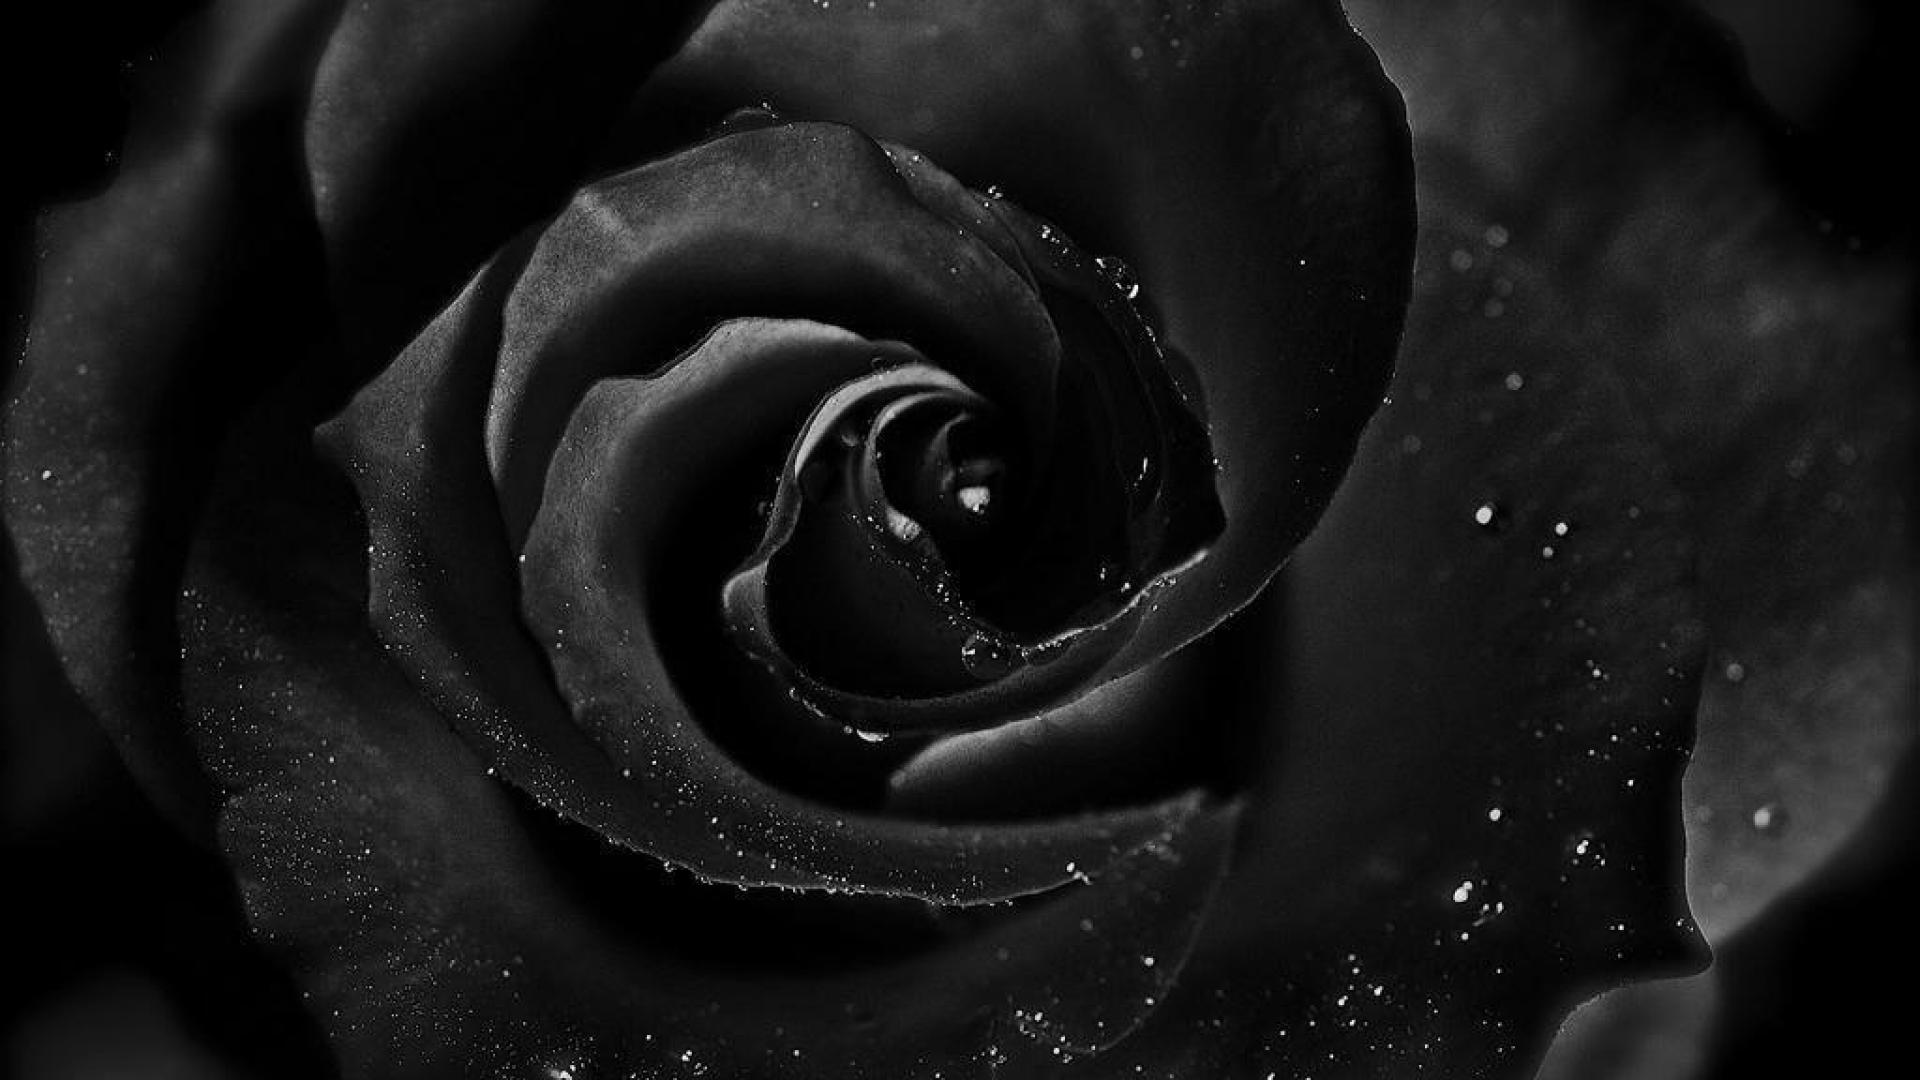 Black Rose Wallpaper HD Wallpapers Backgrounds Images Art Photos. 44